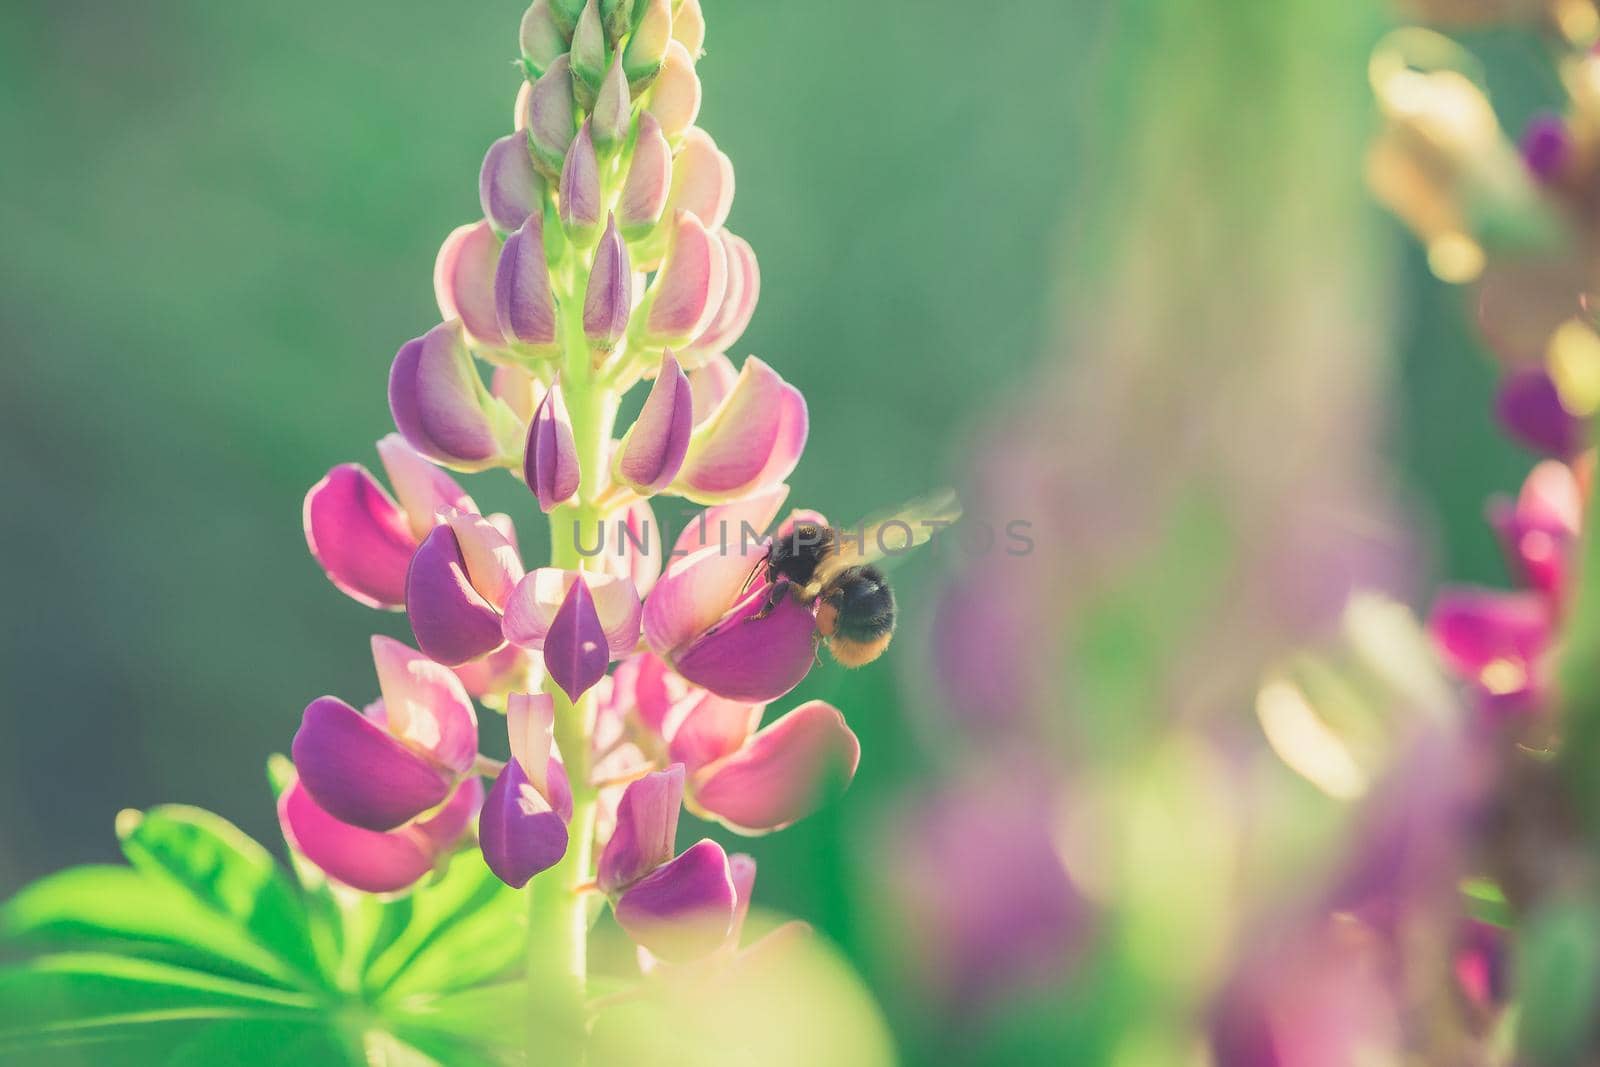 Bumble Bee pollinating and collecting nectar from a Lupin flower in the garden at the Sunset. Shallow debth of field